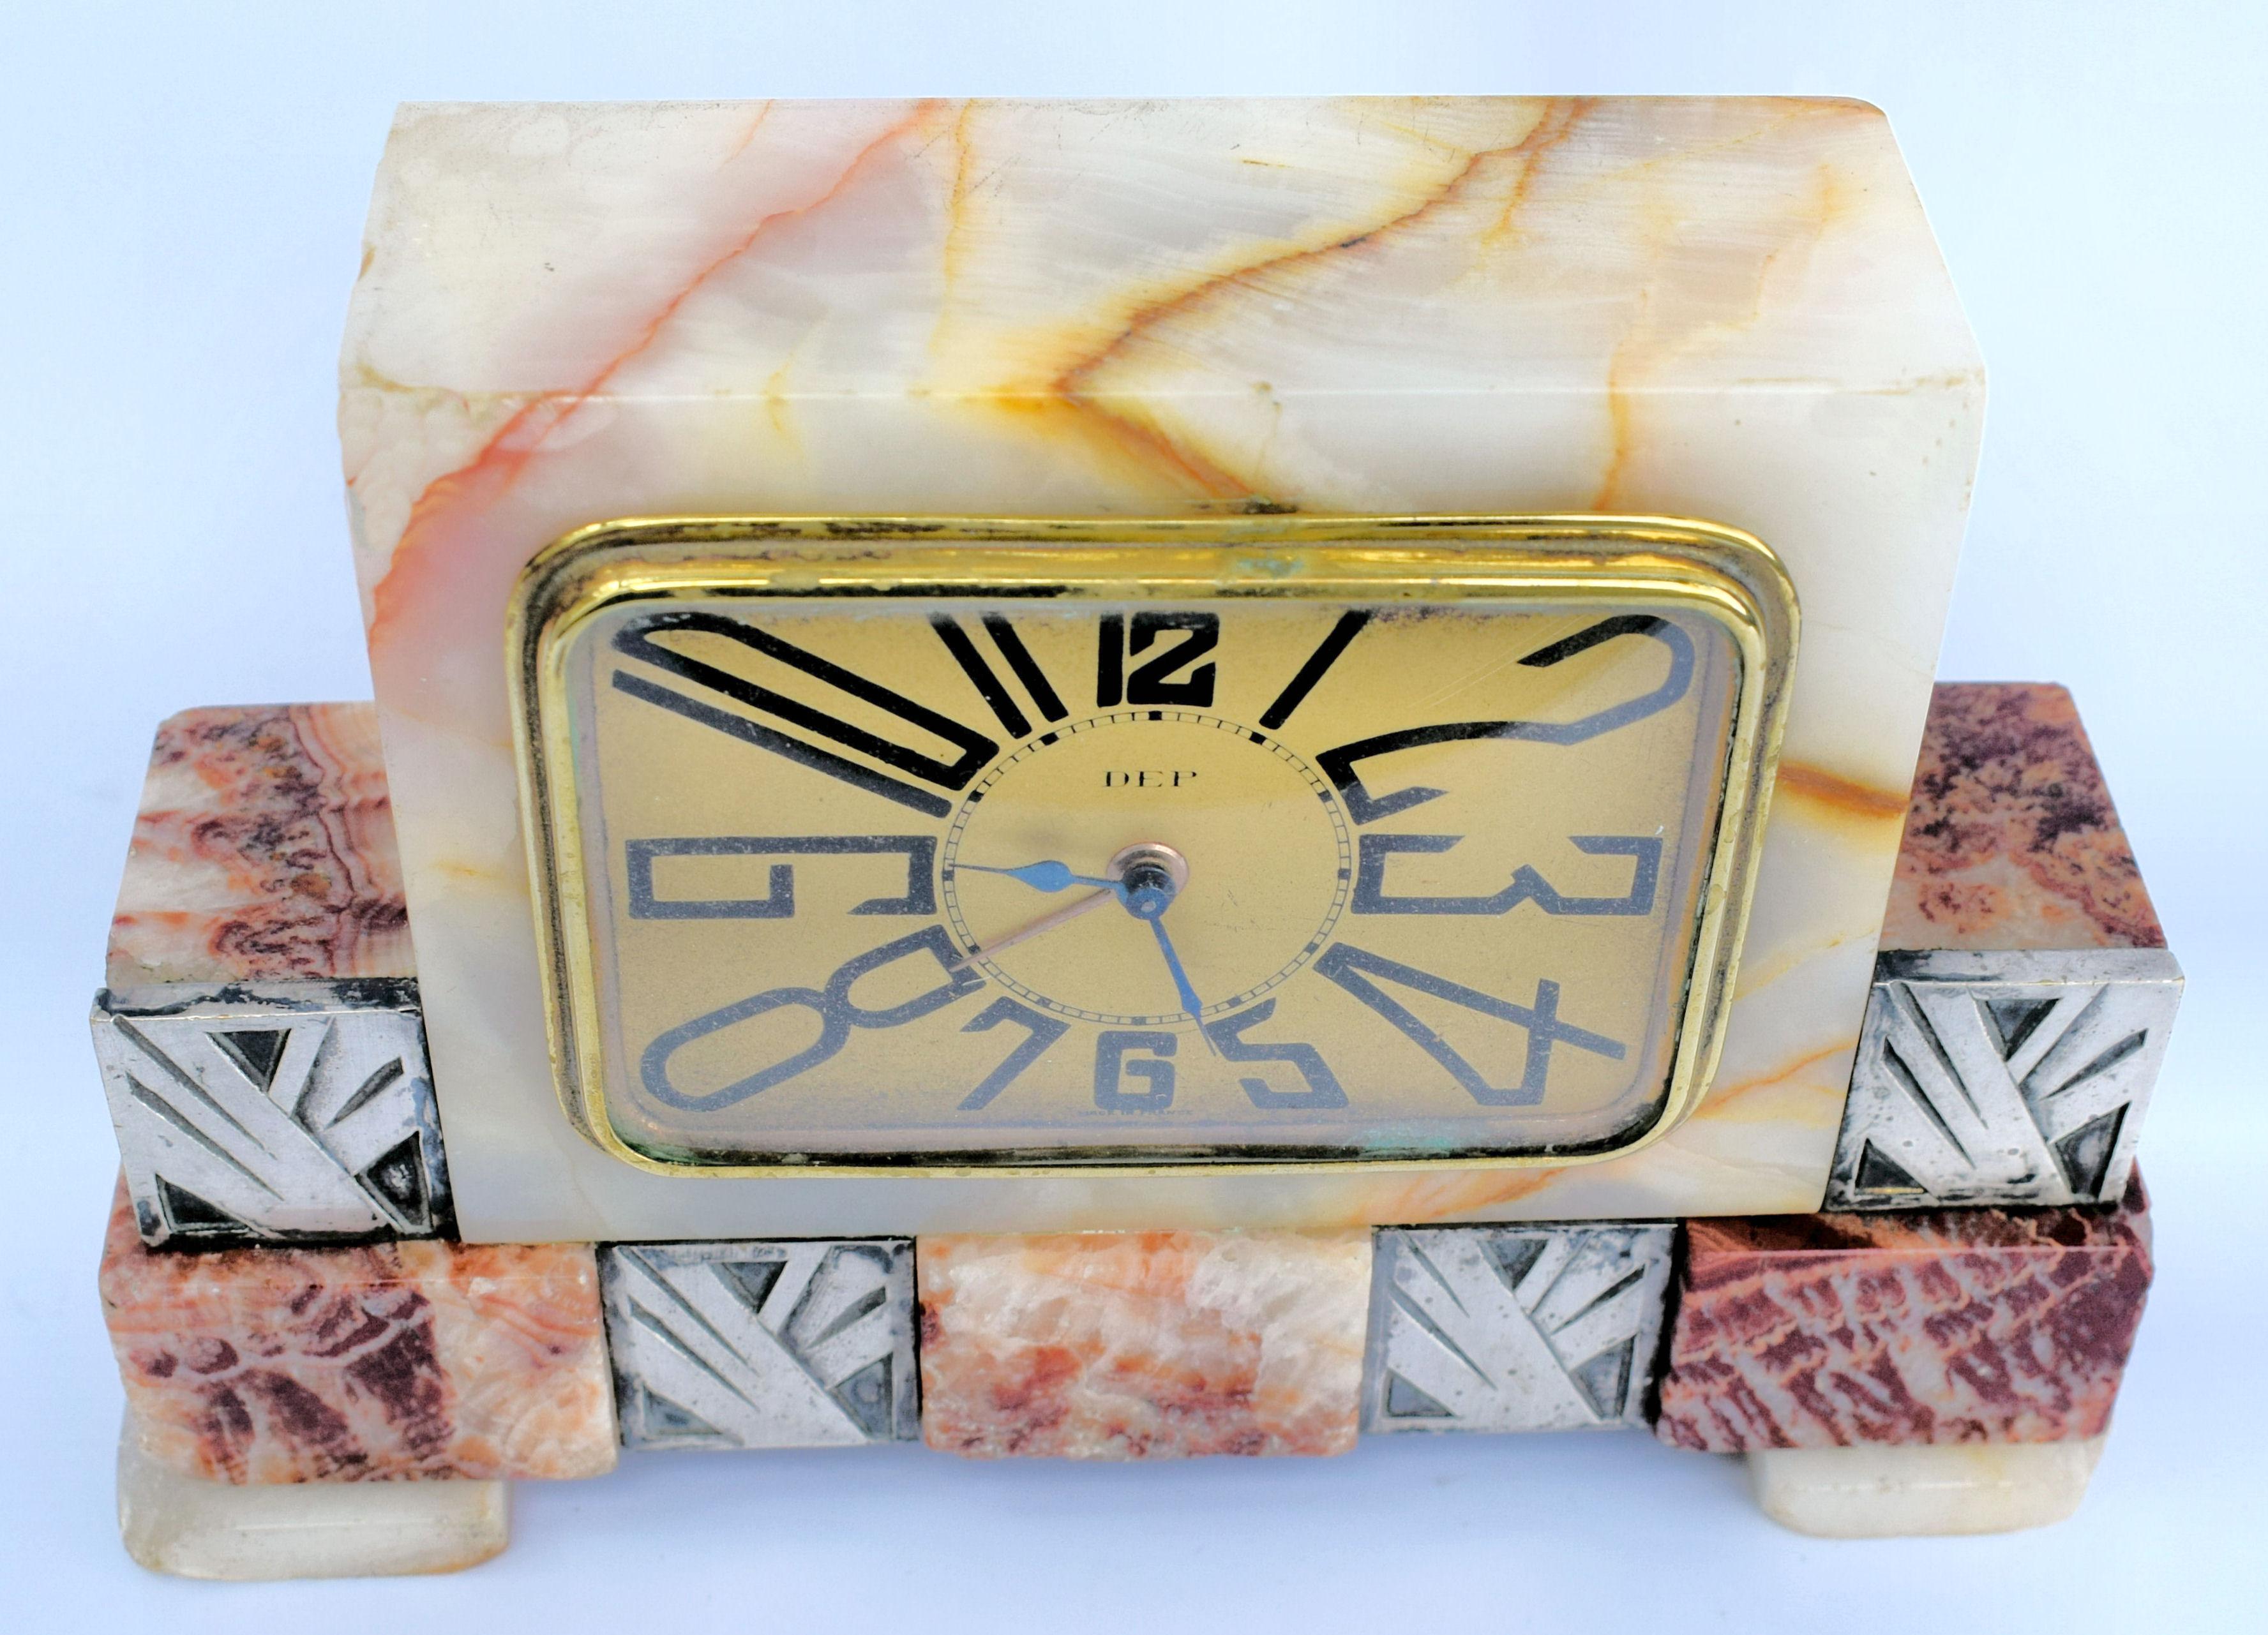 Very striking and distinctive looking 1930s Art Deco French clock by French clockmakers Dep. The case is solid multi colored marble, the bezel and face are in gold tone metal. There are silvered spelter accents adding more decoration to the exterior